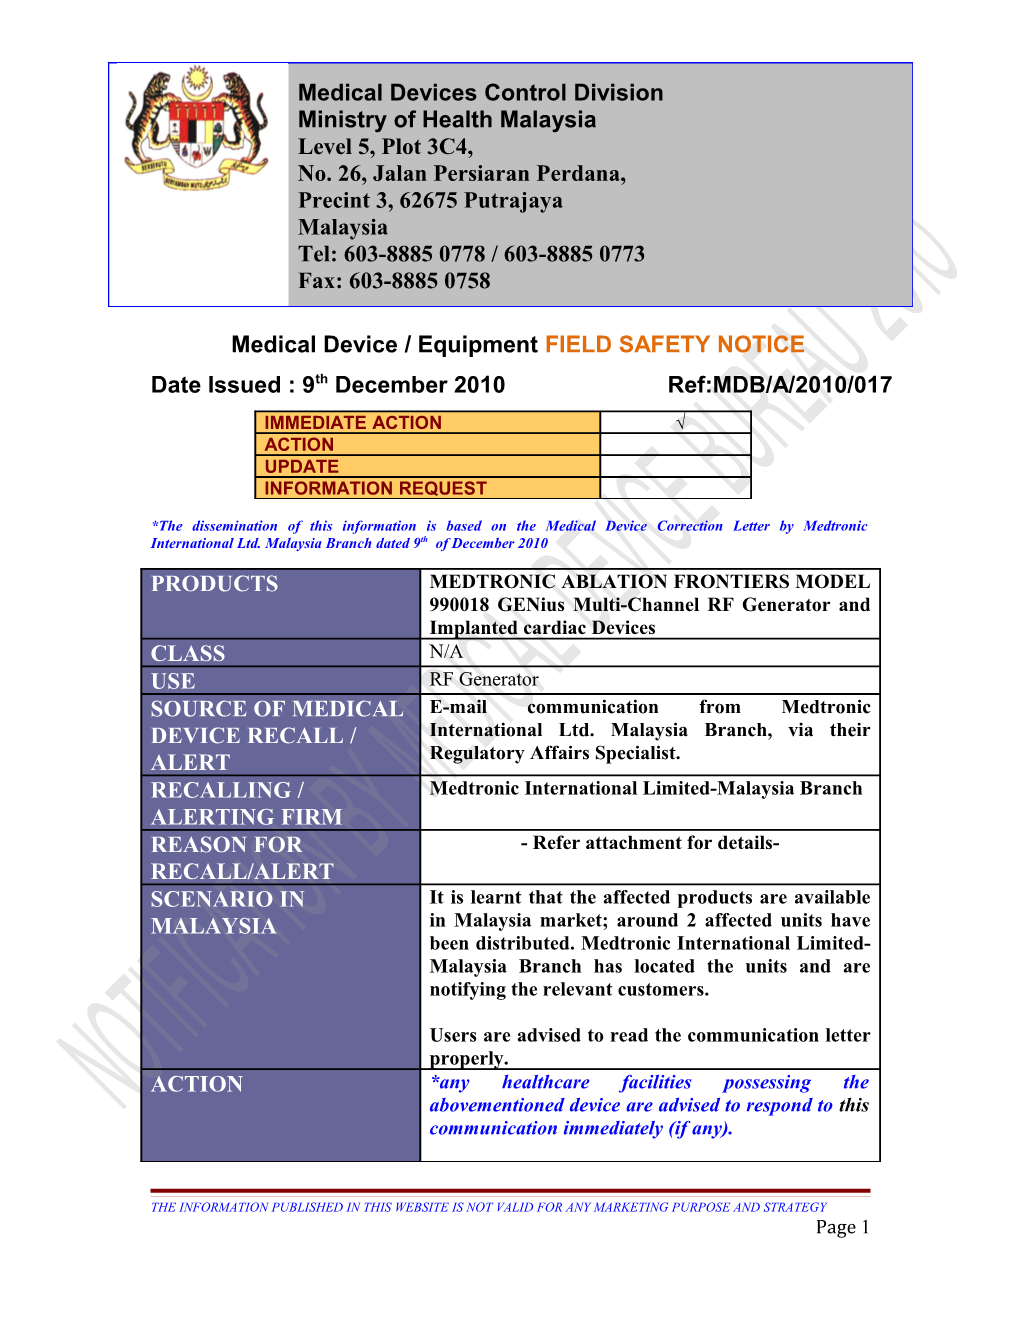 Medical Device / Equipmentfield SAFETY NOTICE